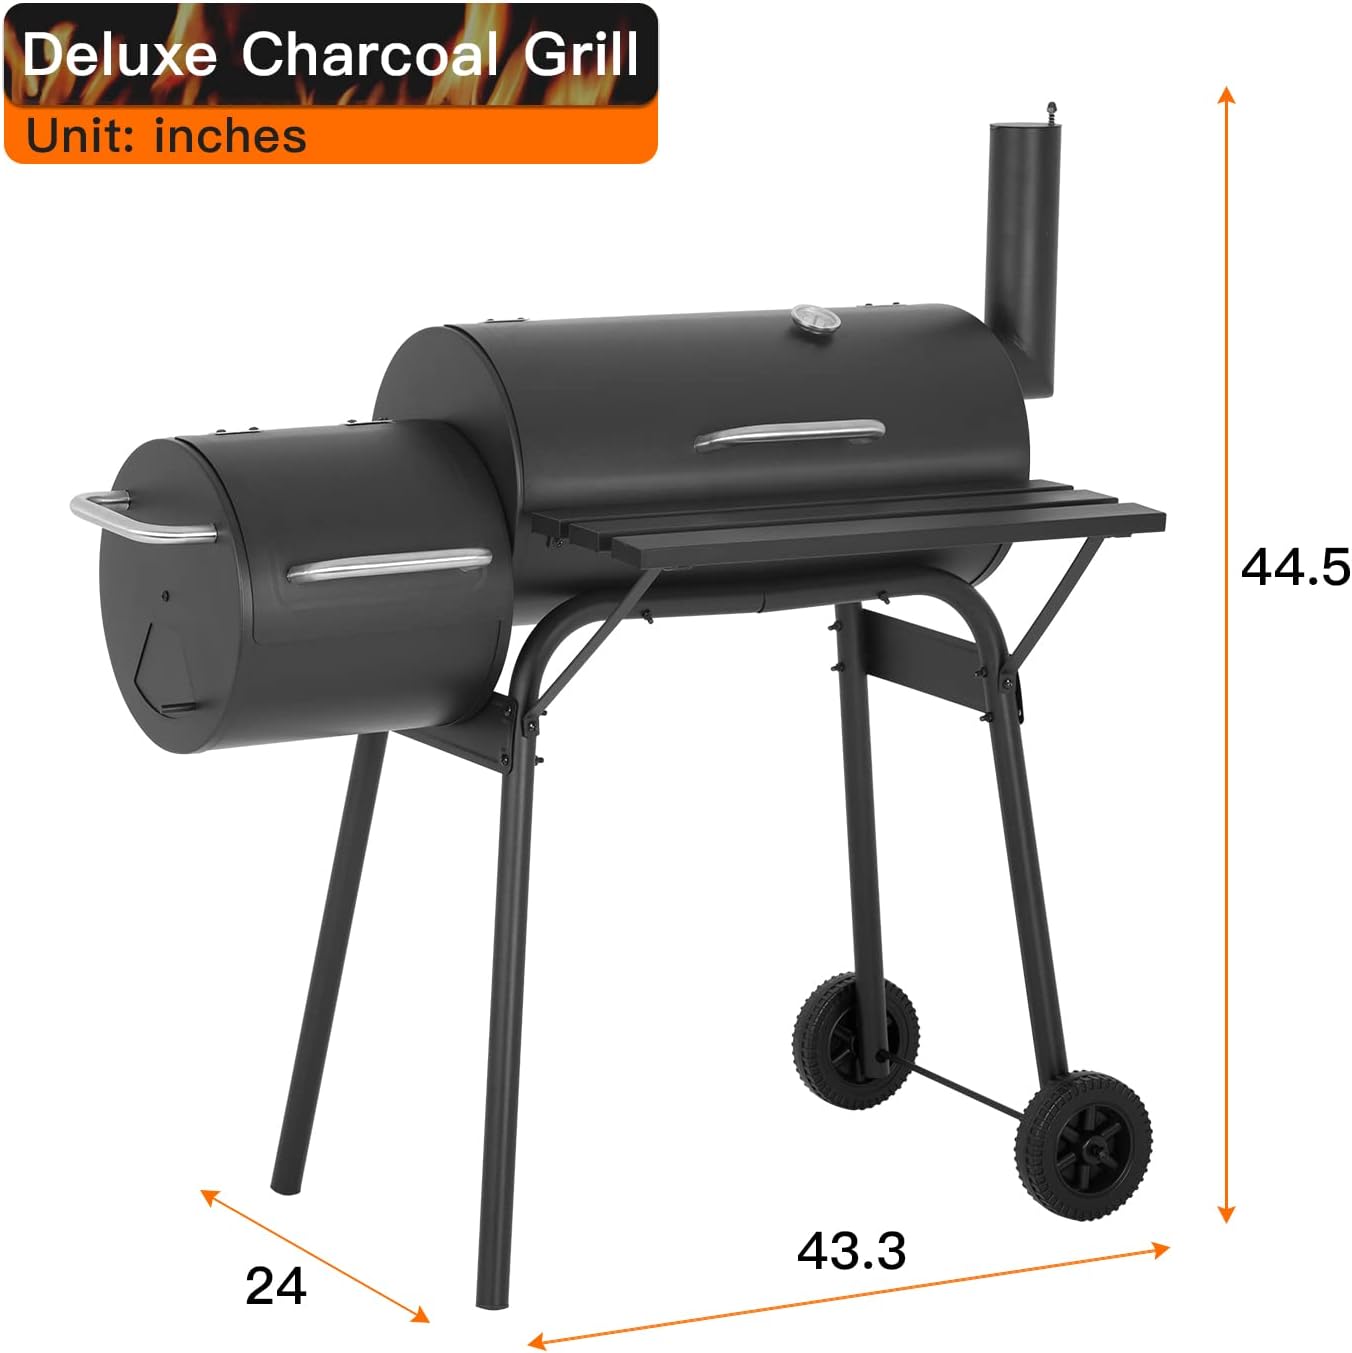 43-inch Charcoal Outdoor BBQ Grill - Portable Camping Grill for 6-10 People, Offset Smoker, Braised Roast, Patio and Backyard Picnic Grill